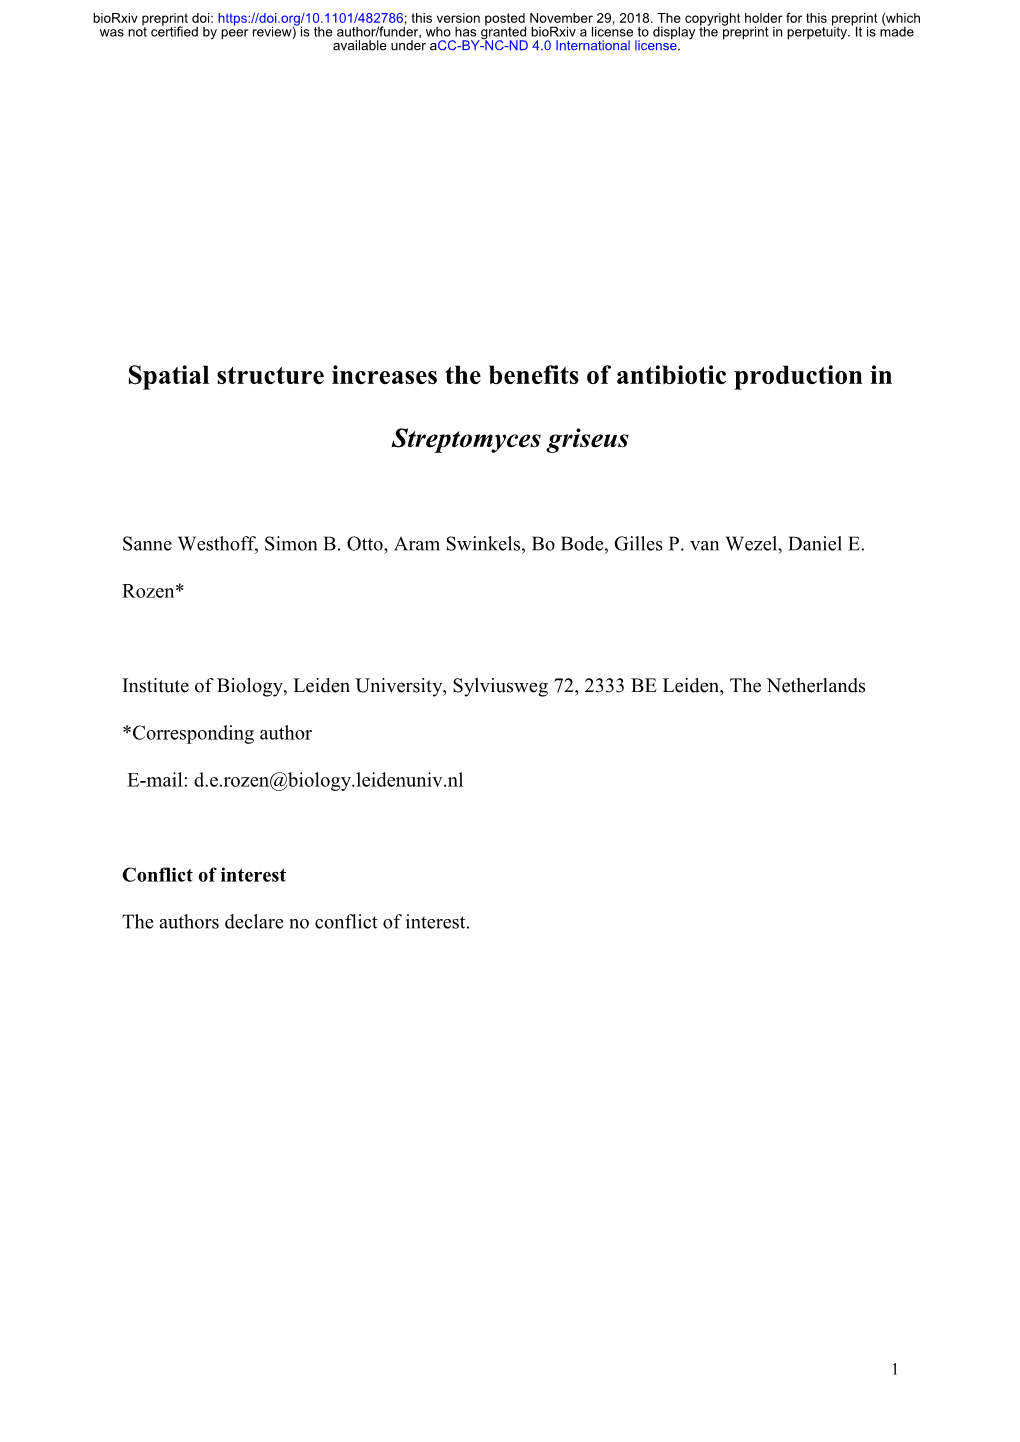 Spatial Structure Increases the Benefits of Antibiotic Production In